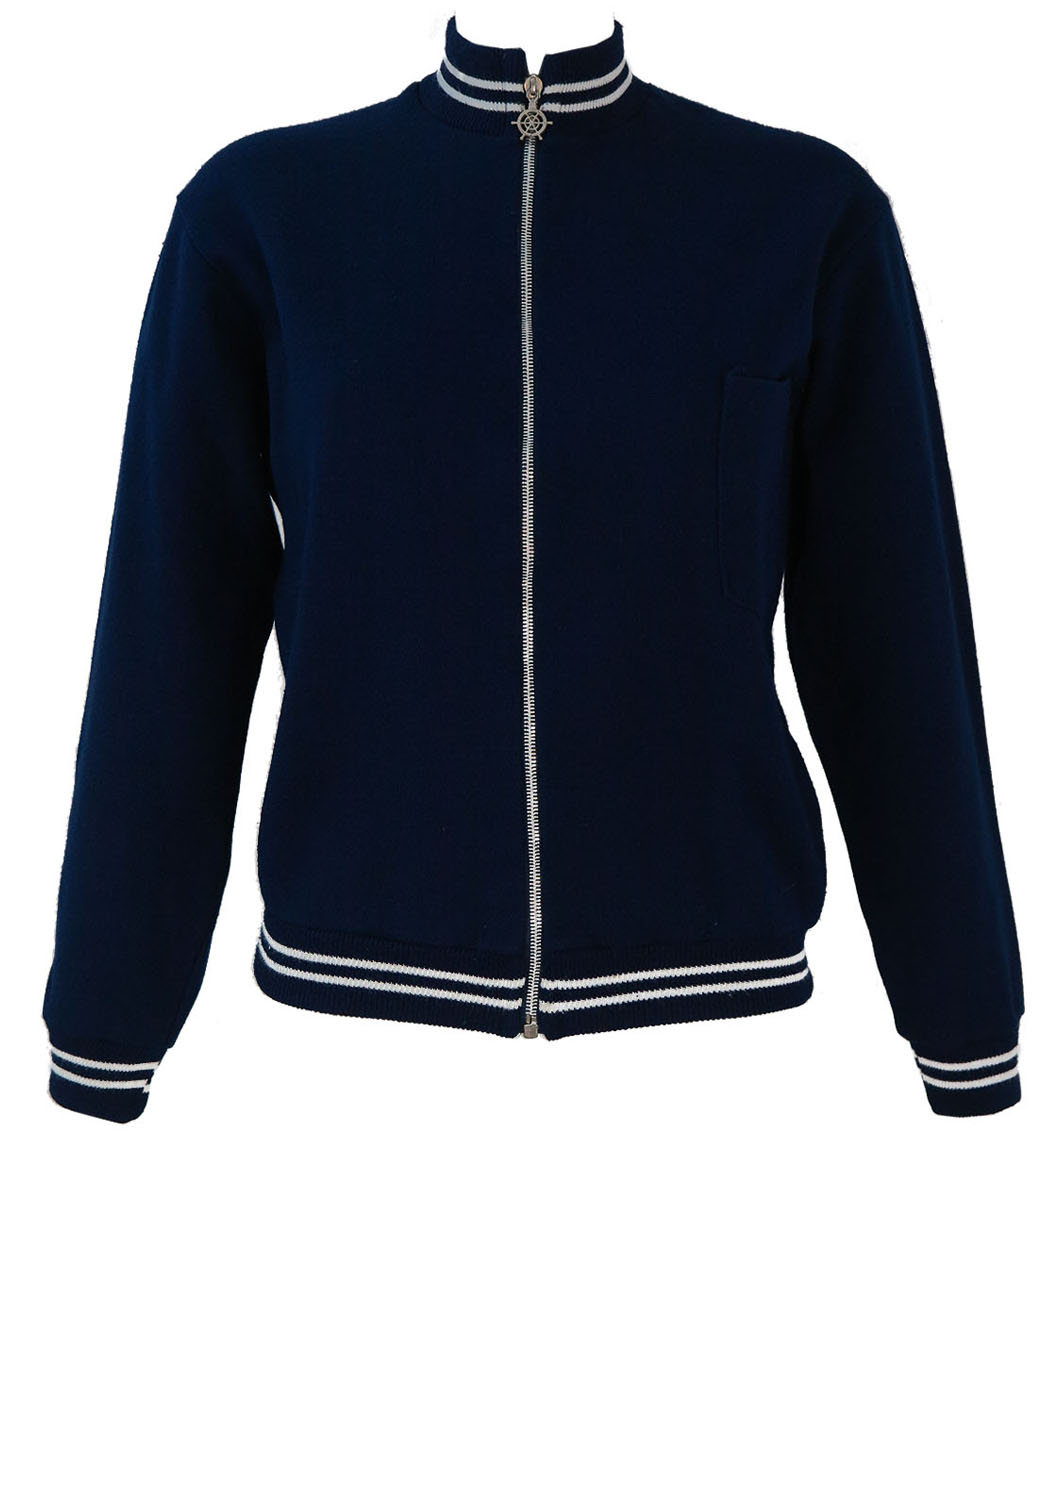 Navy Blue Track Jacket with White Stripes and Nautical Zip Fob - S/M ...